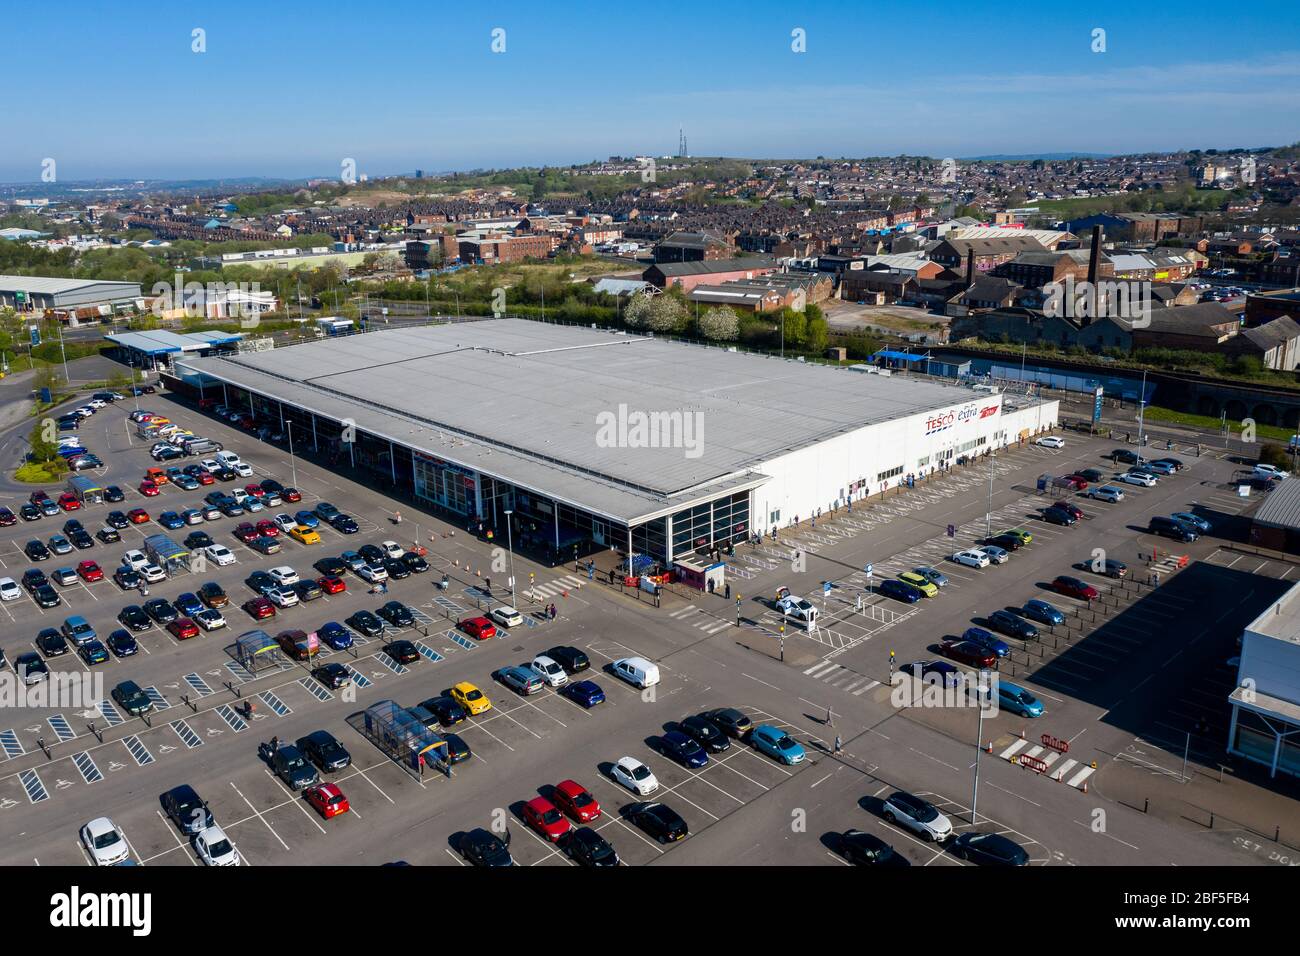 People queue 2 metres apart for a long distance outside of the Tesco extra store in Longton, Stoke on Trent, Social distancing, Covid 19, Coronavirus Stock Photo